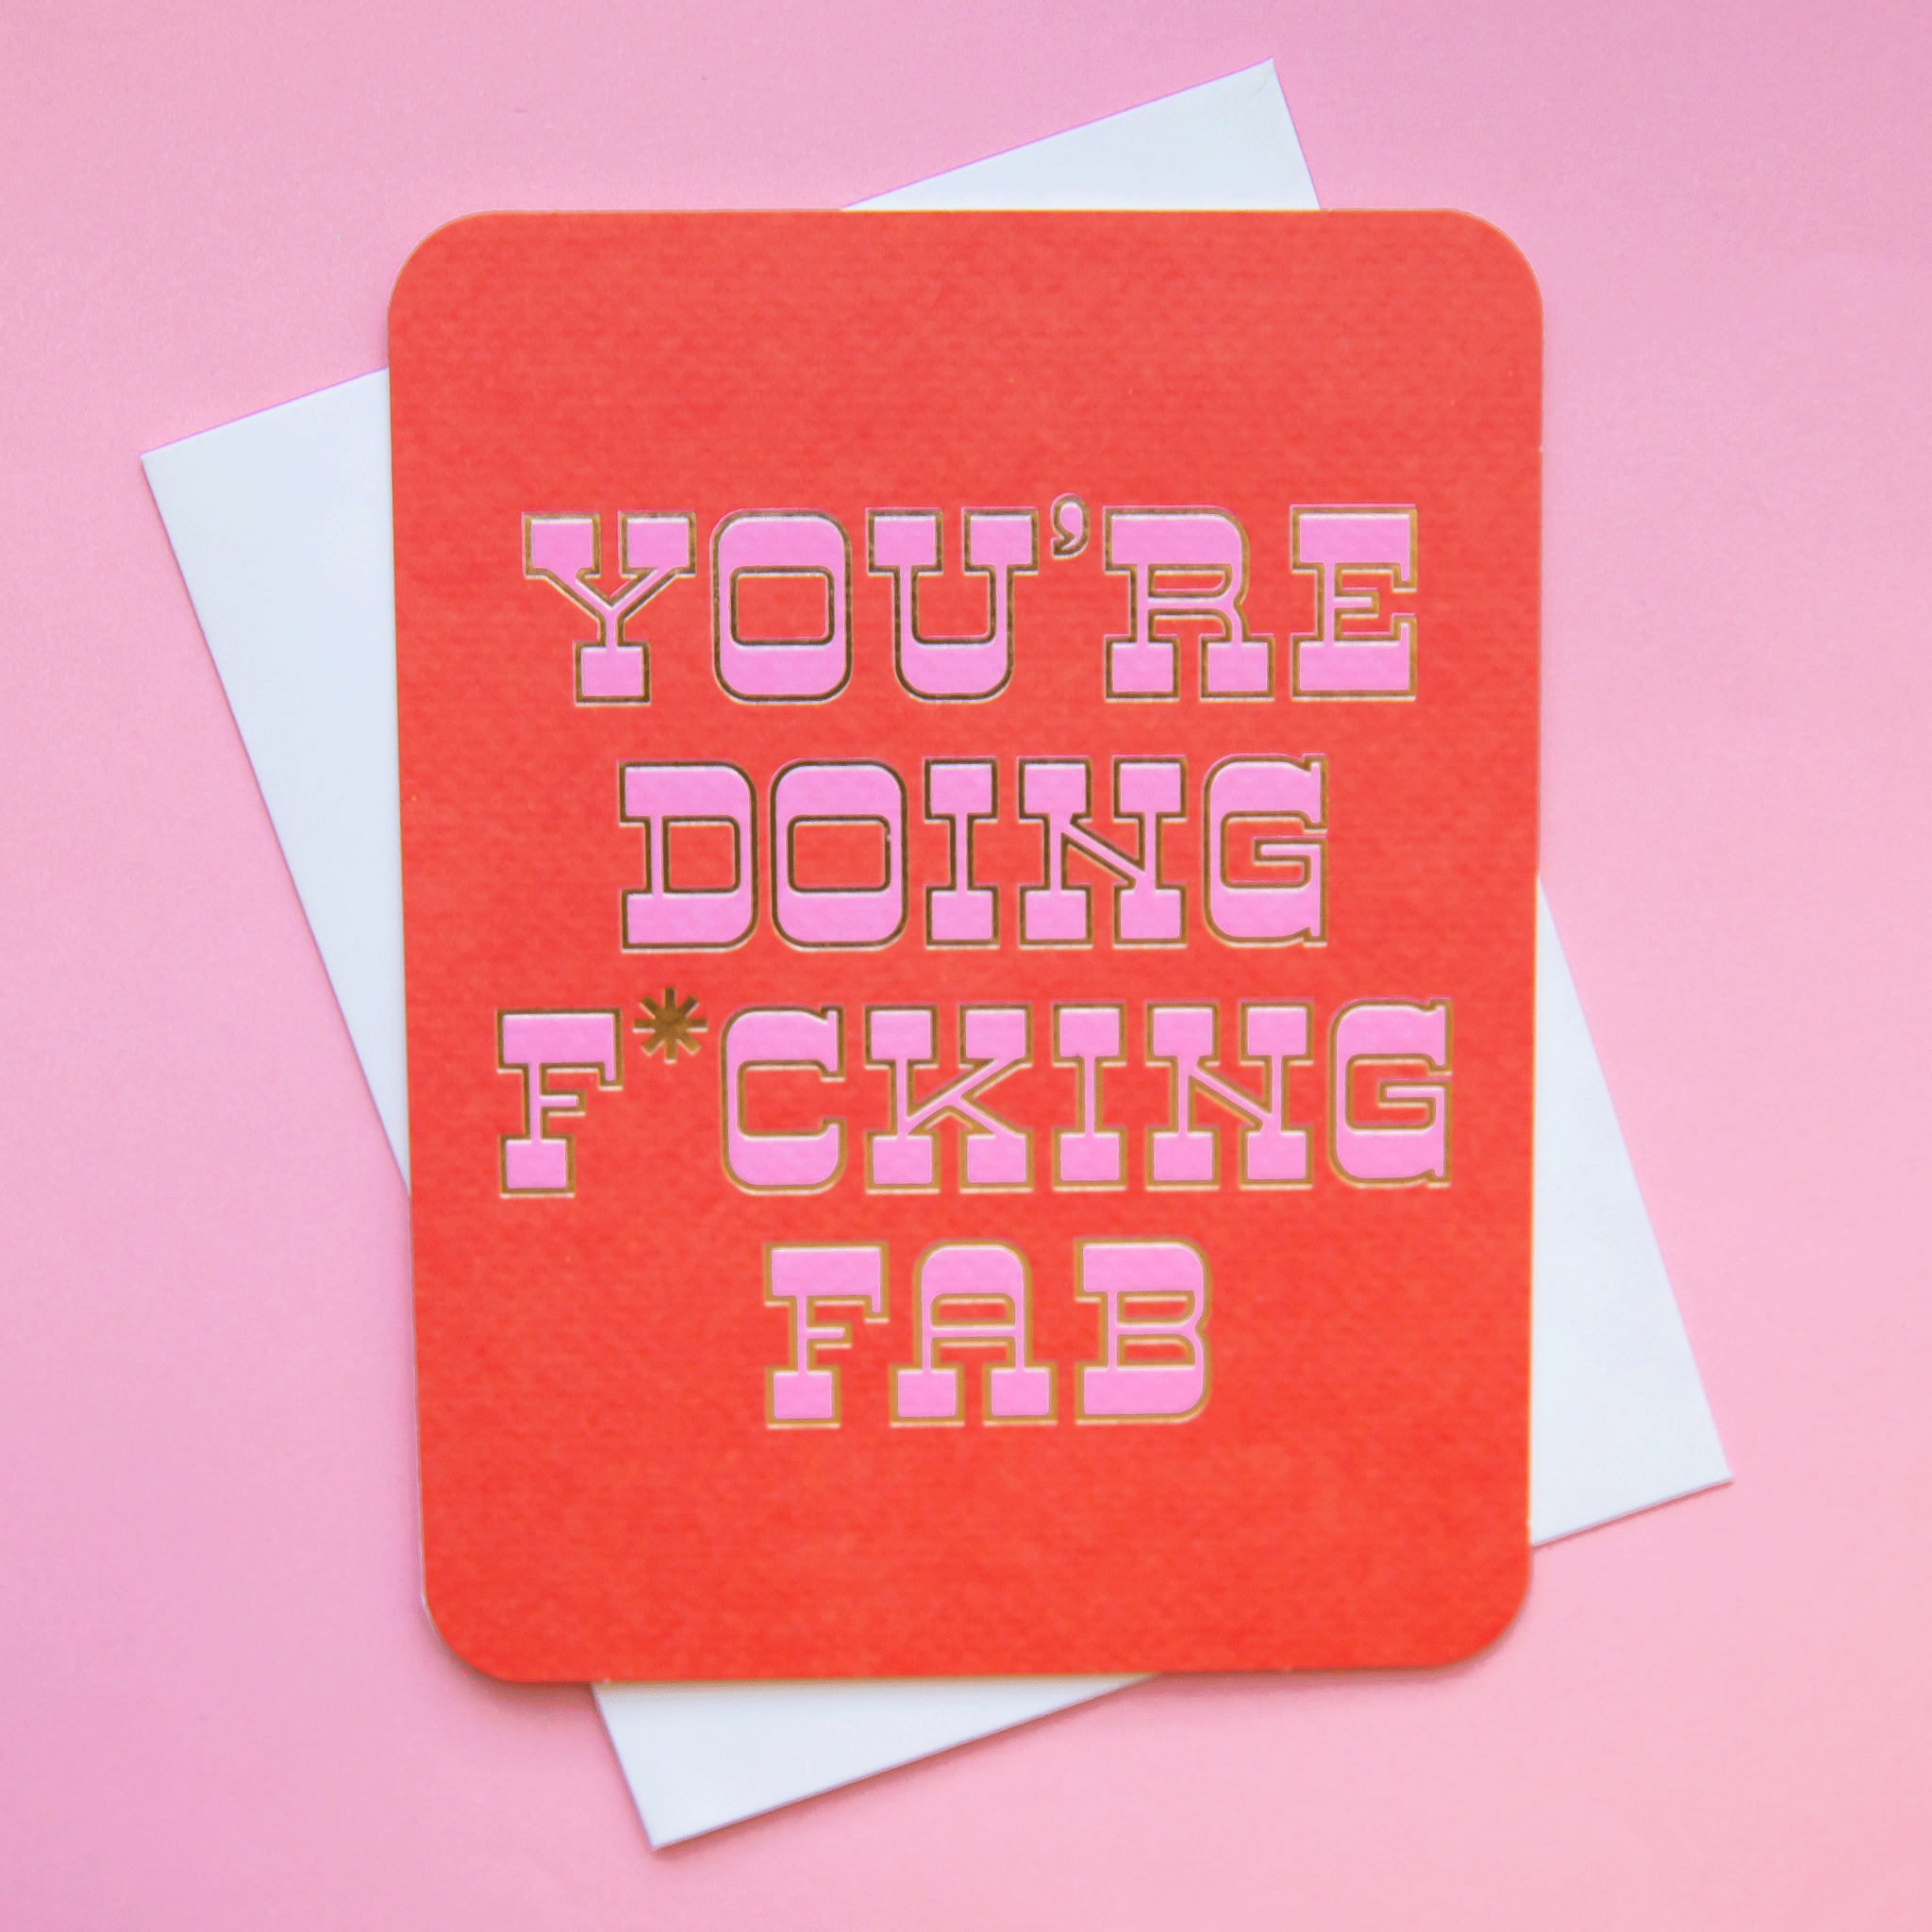 A red card with pink western style text that reads, "You're Doing F*cking Fab" along with a white envelope.